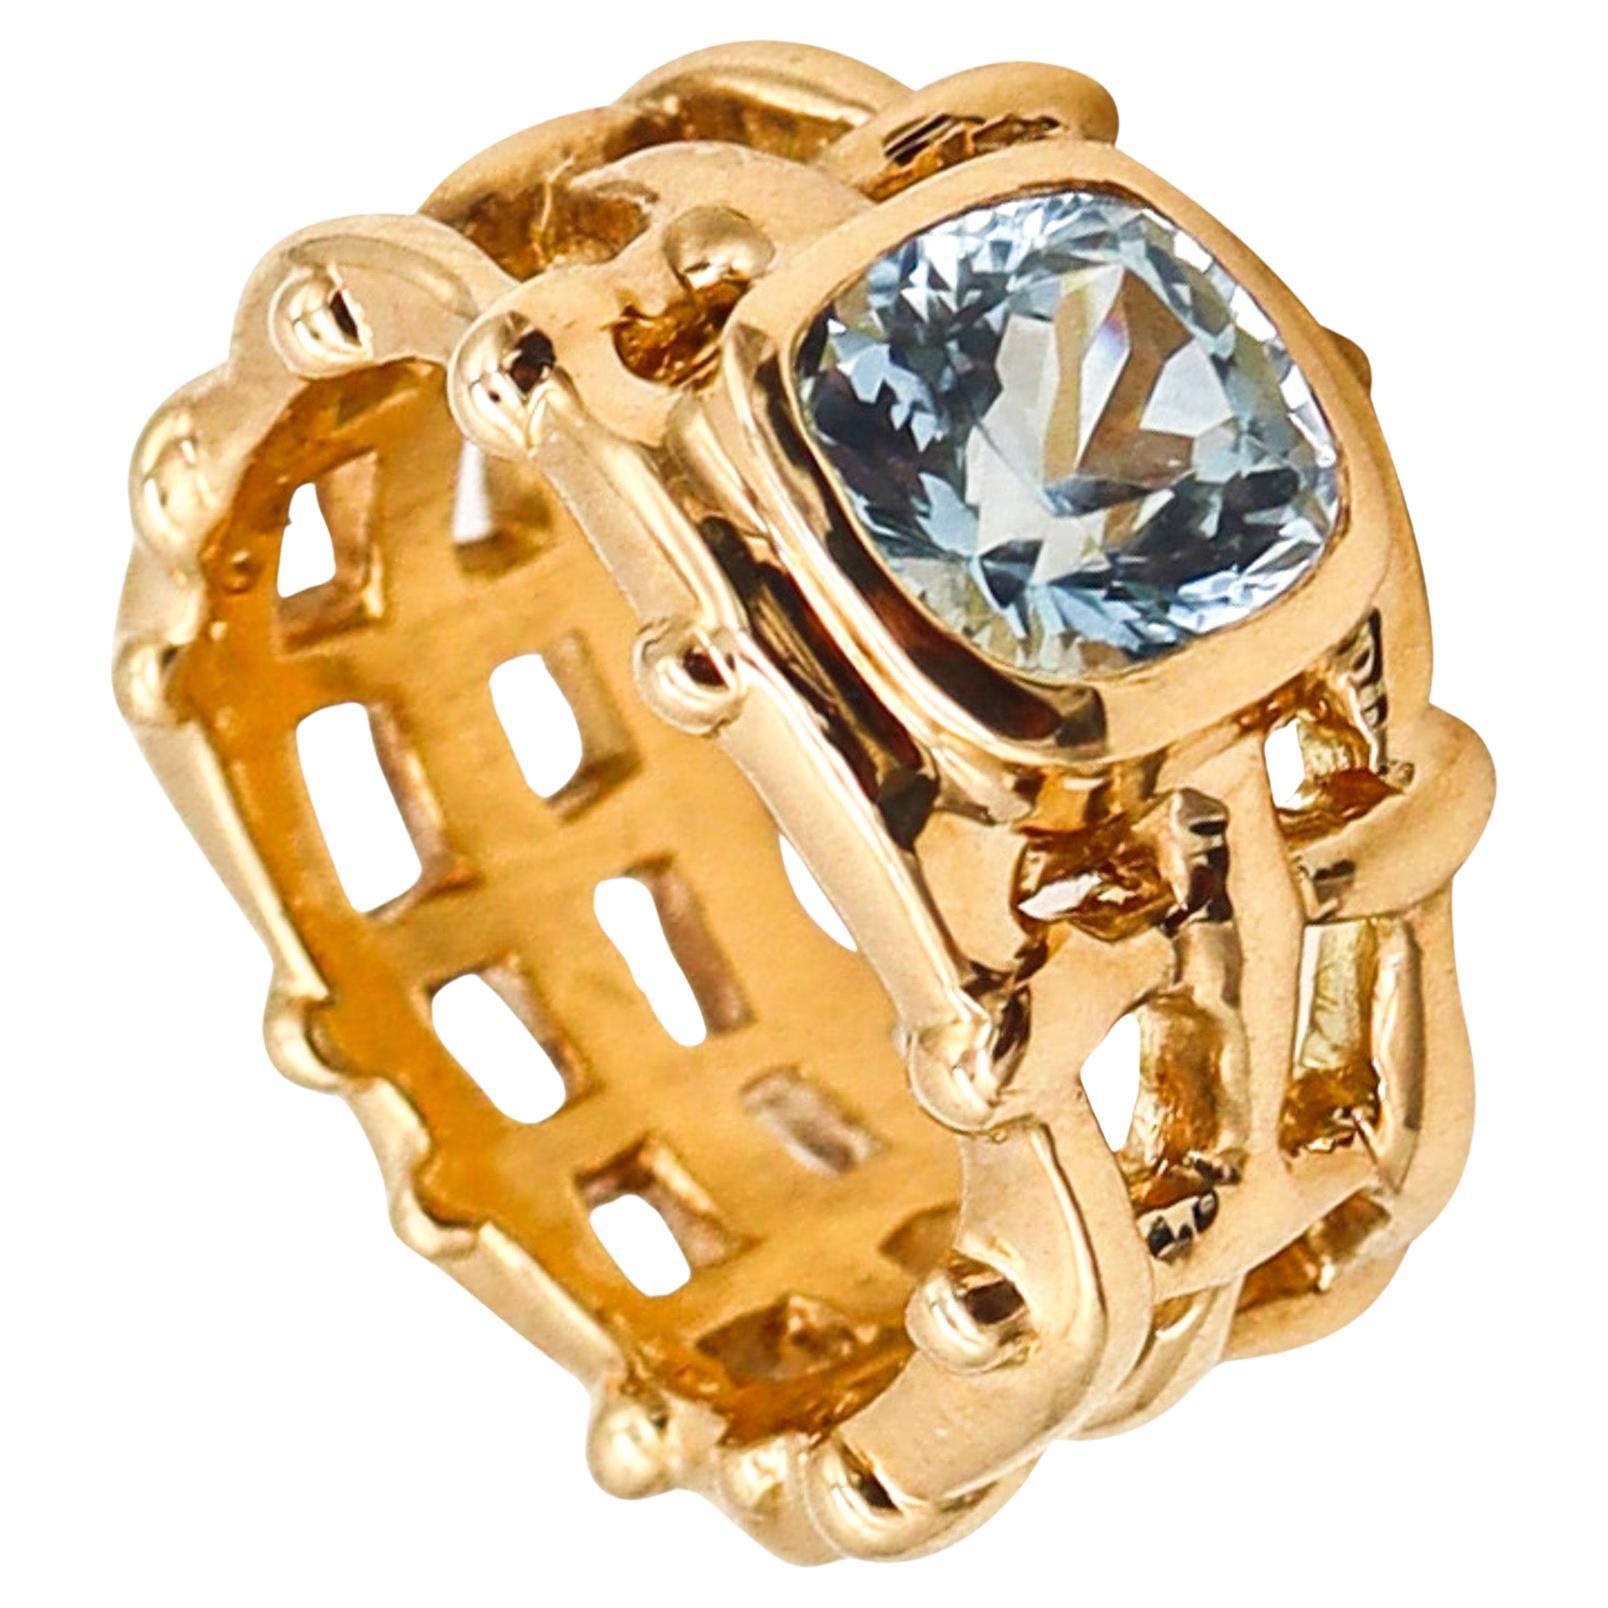 Angela Cummings Studios Cocktail Ring In 18Kt Gold With 2.32 Cts Aquamarine For Sale